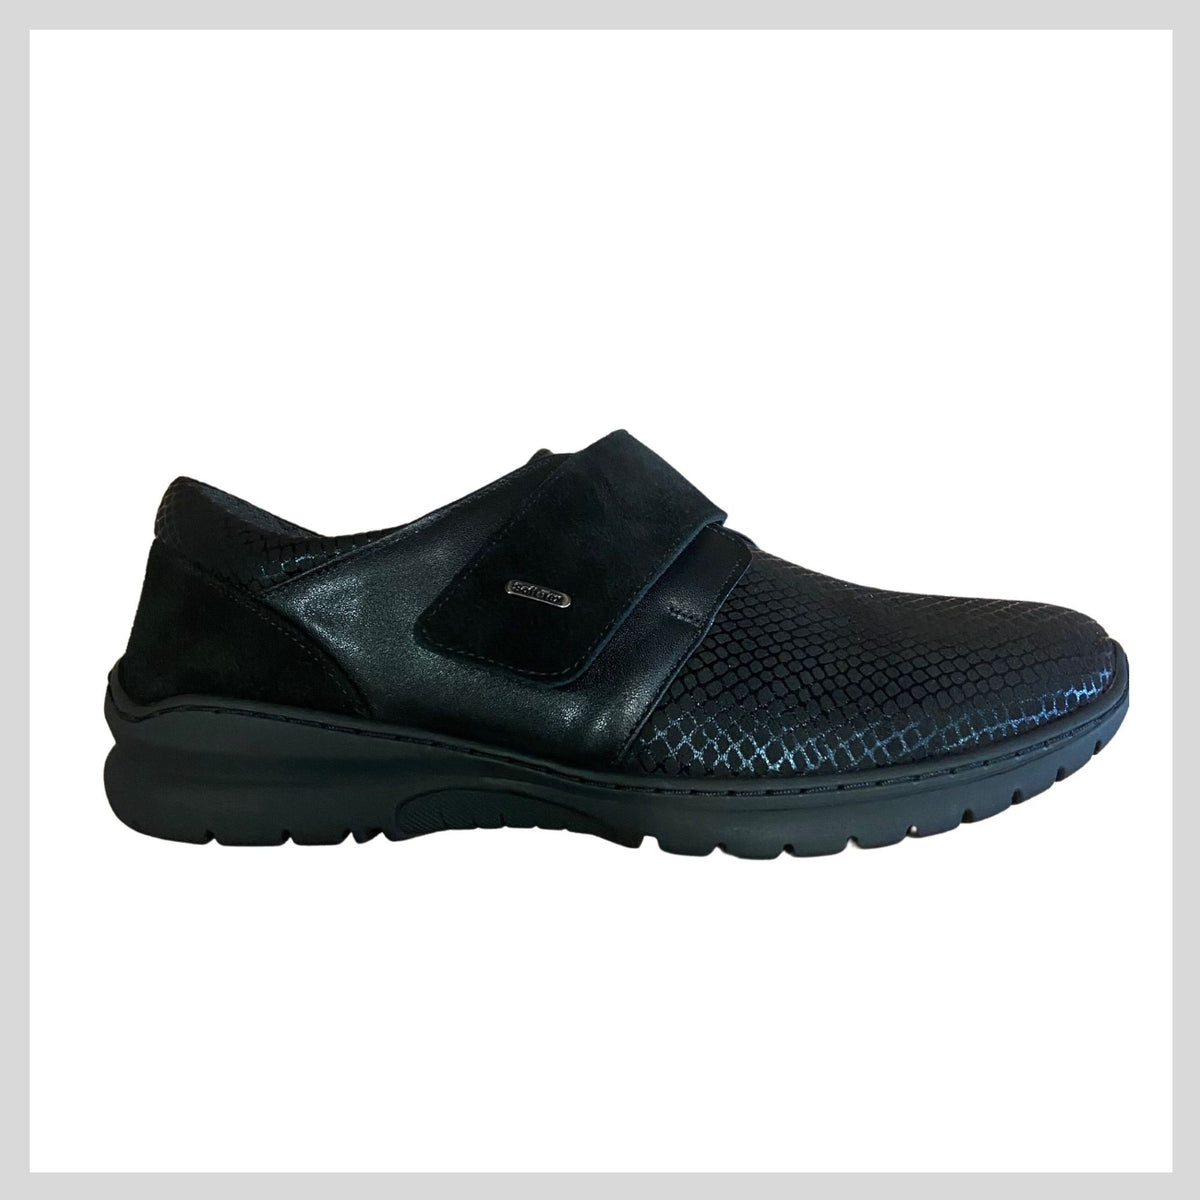 Softmode Daba Black Leather/ Suede